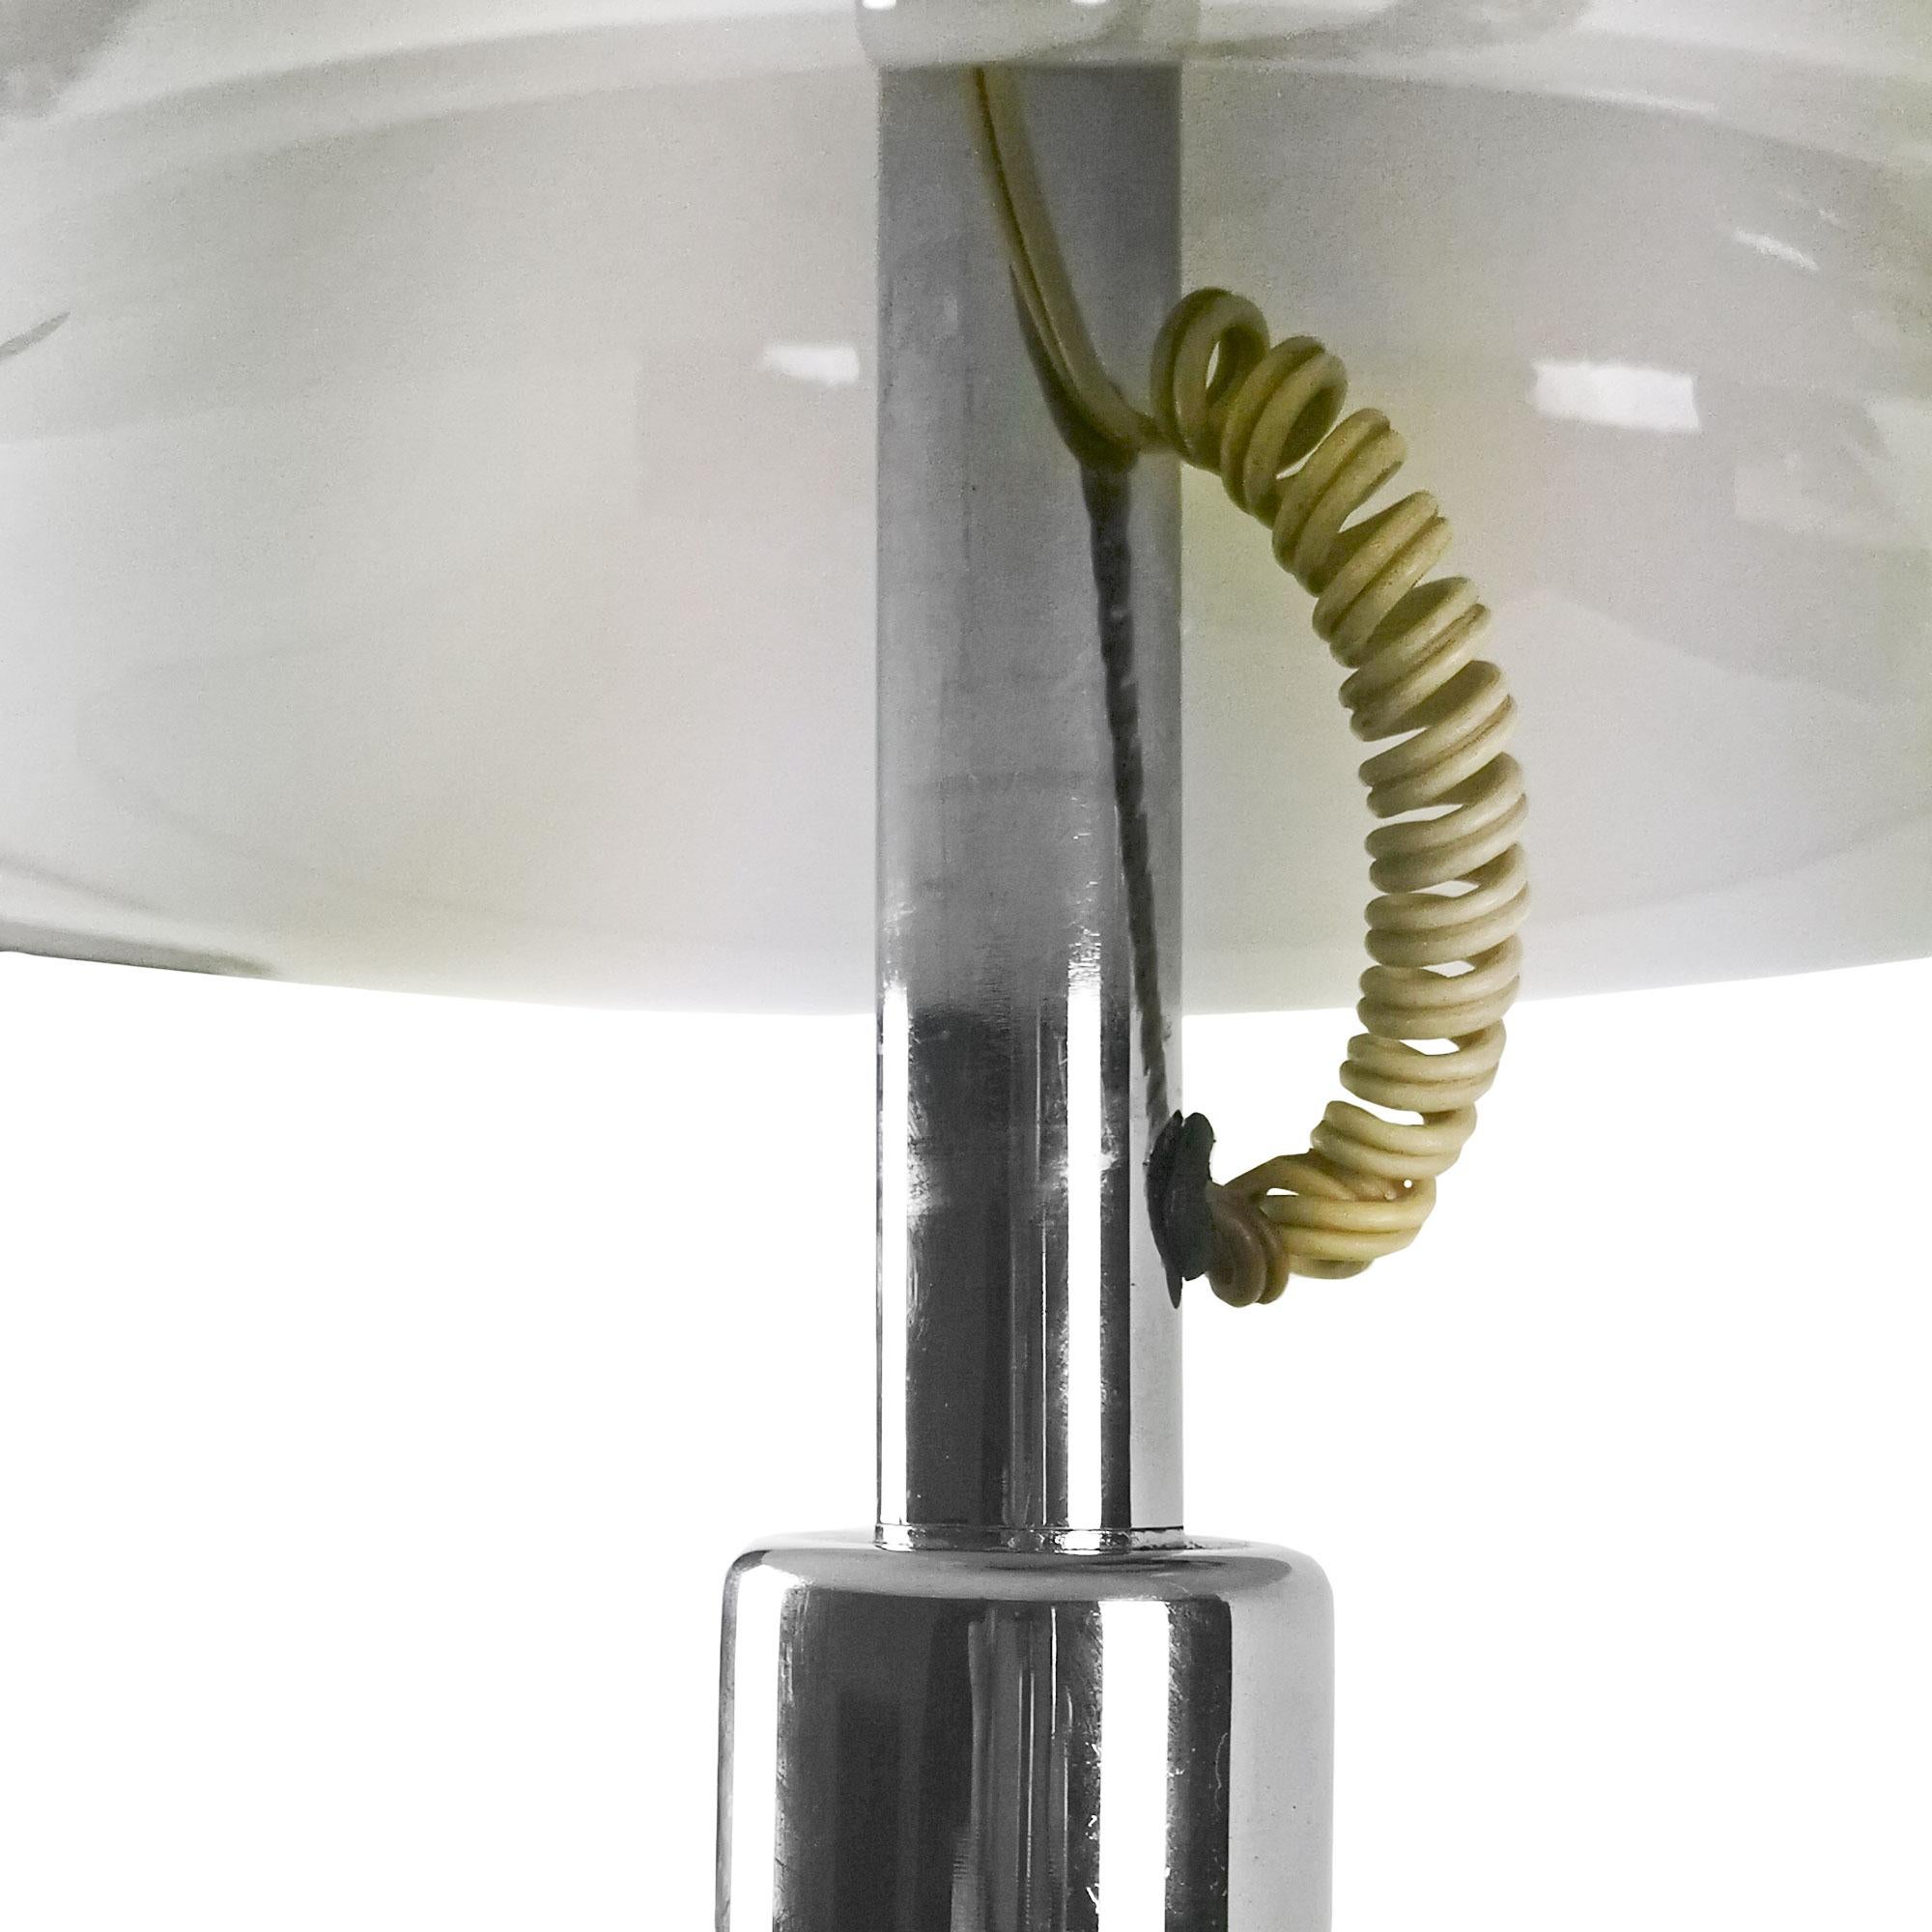 Modern Enric Franch's Toro Table Lamp In Steel, Metal And Plexiglass - Spain, 1976 For Sale